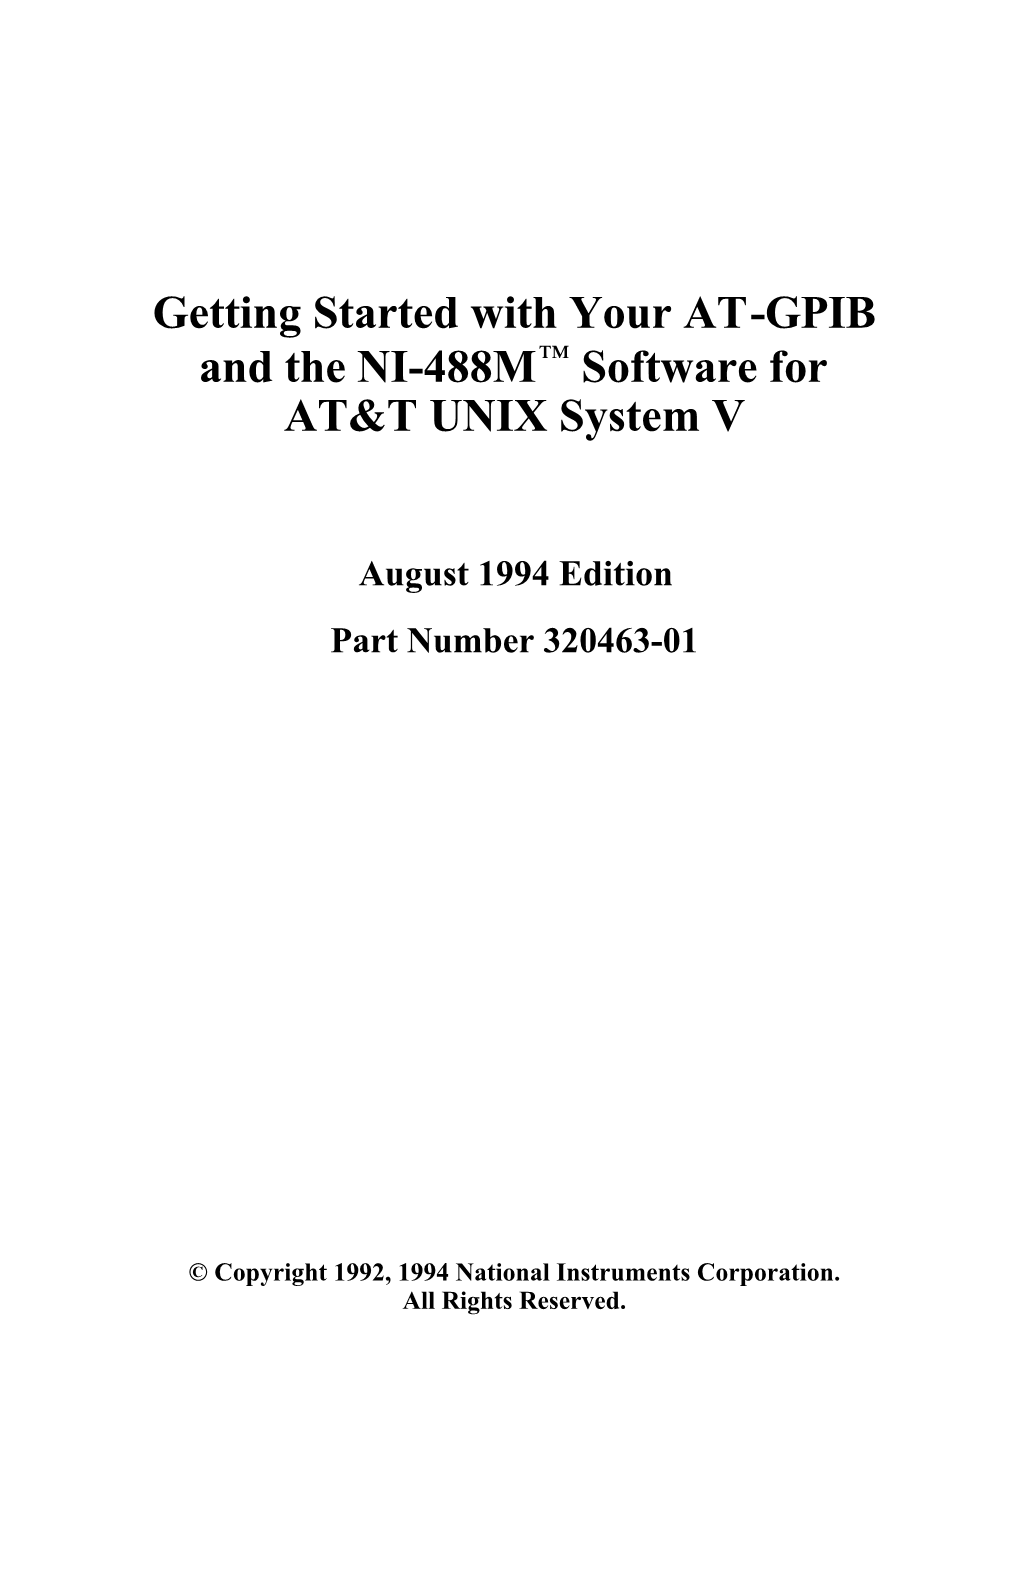 AT-GPIB and NI-488M for AT&T UNIX System V